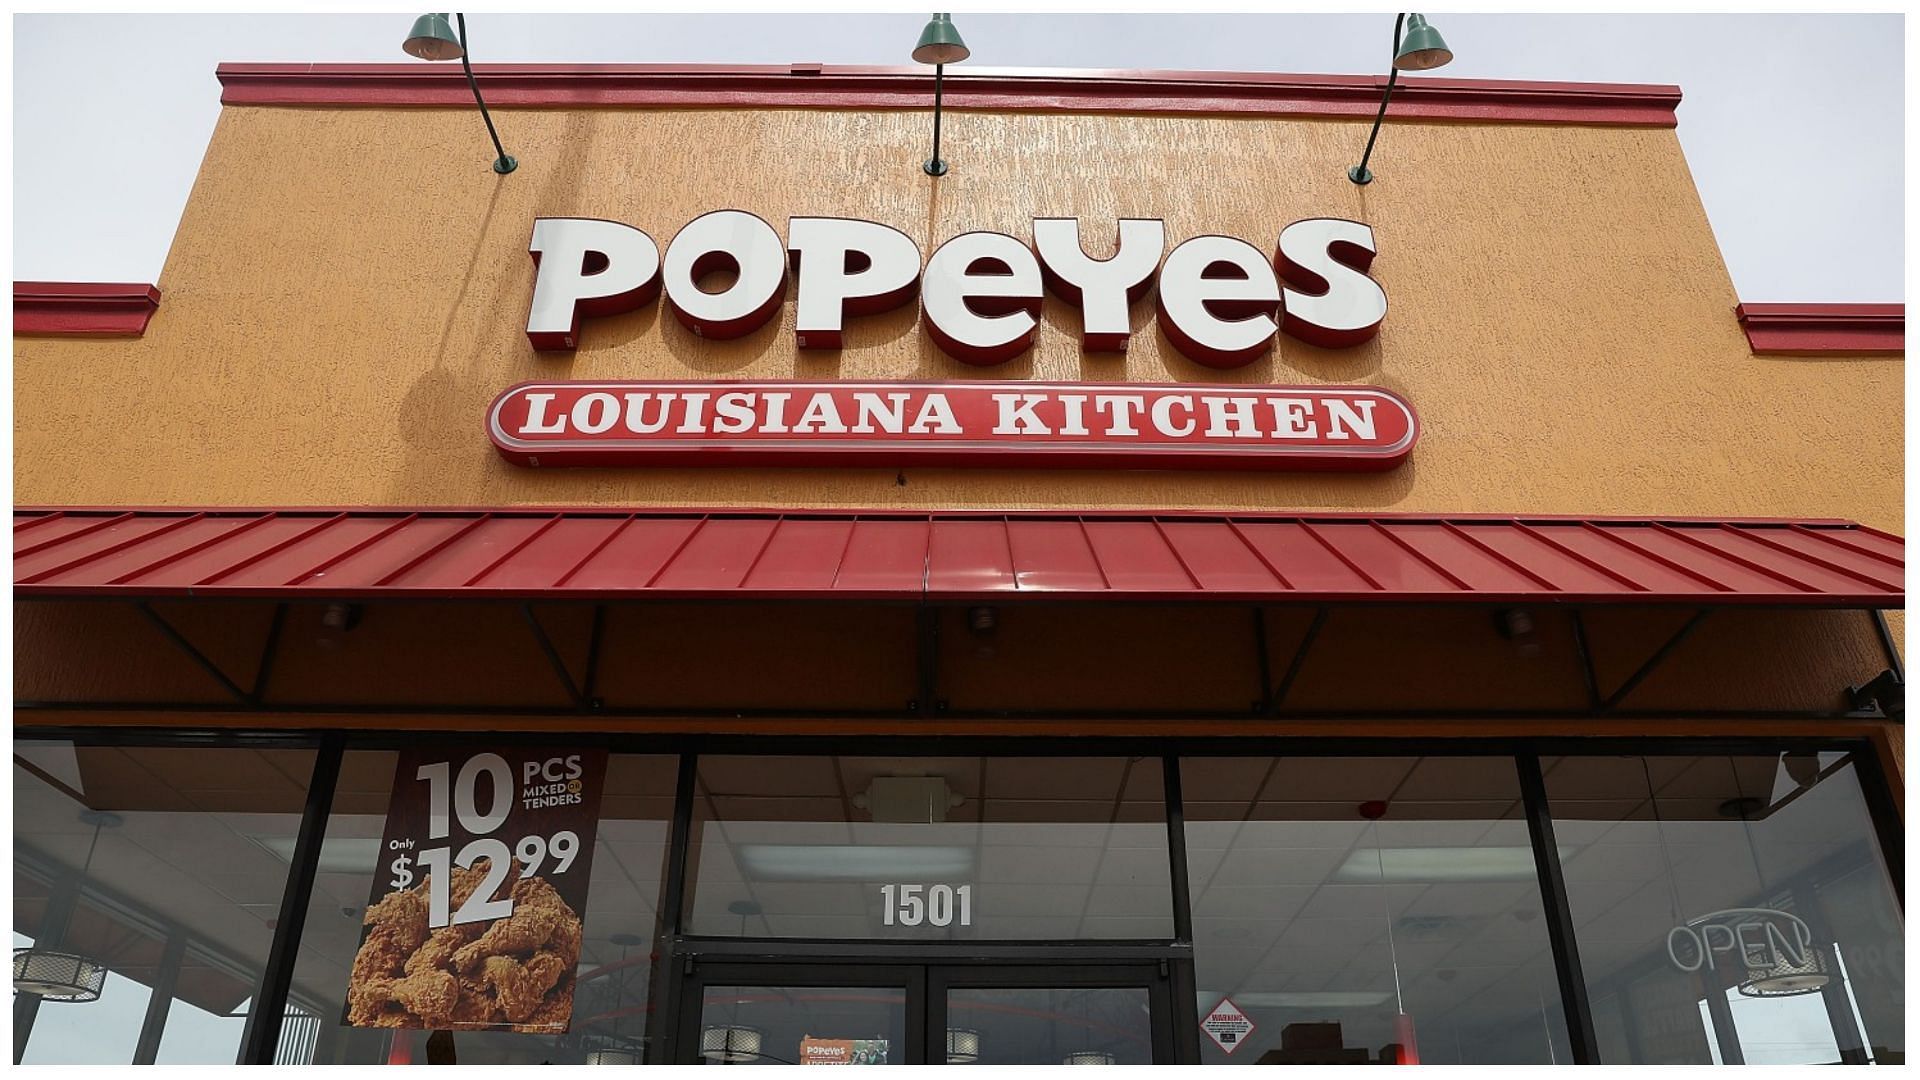 Popeyes restaurant in Miami, Florida (Photo by Joe Raedle/Getty Images)